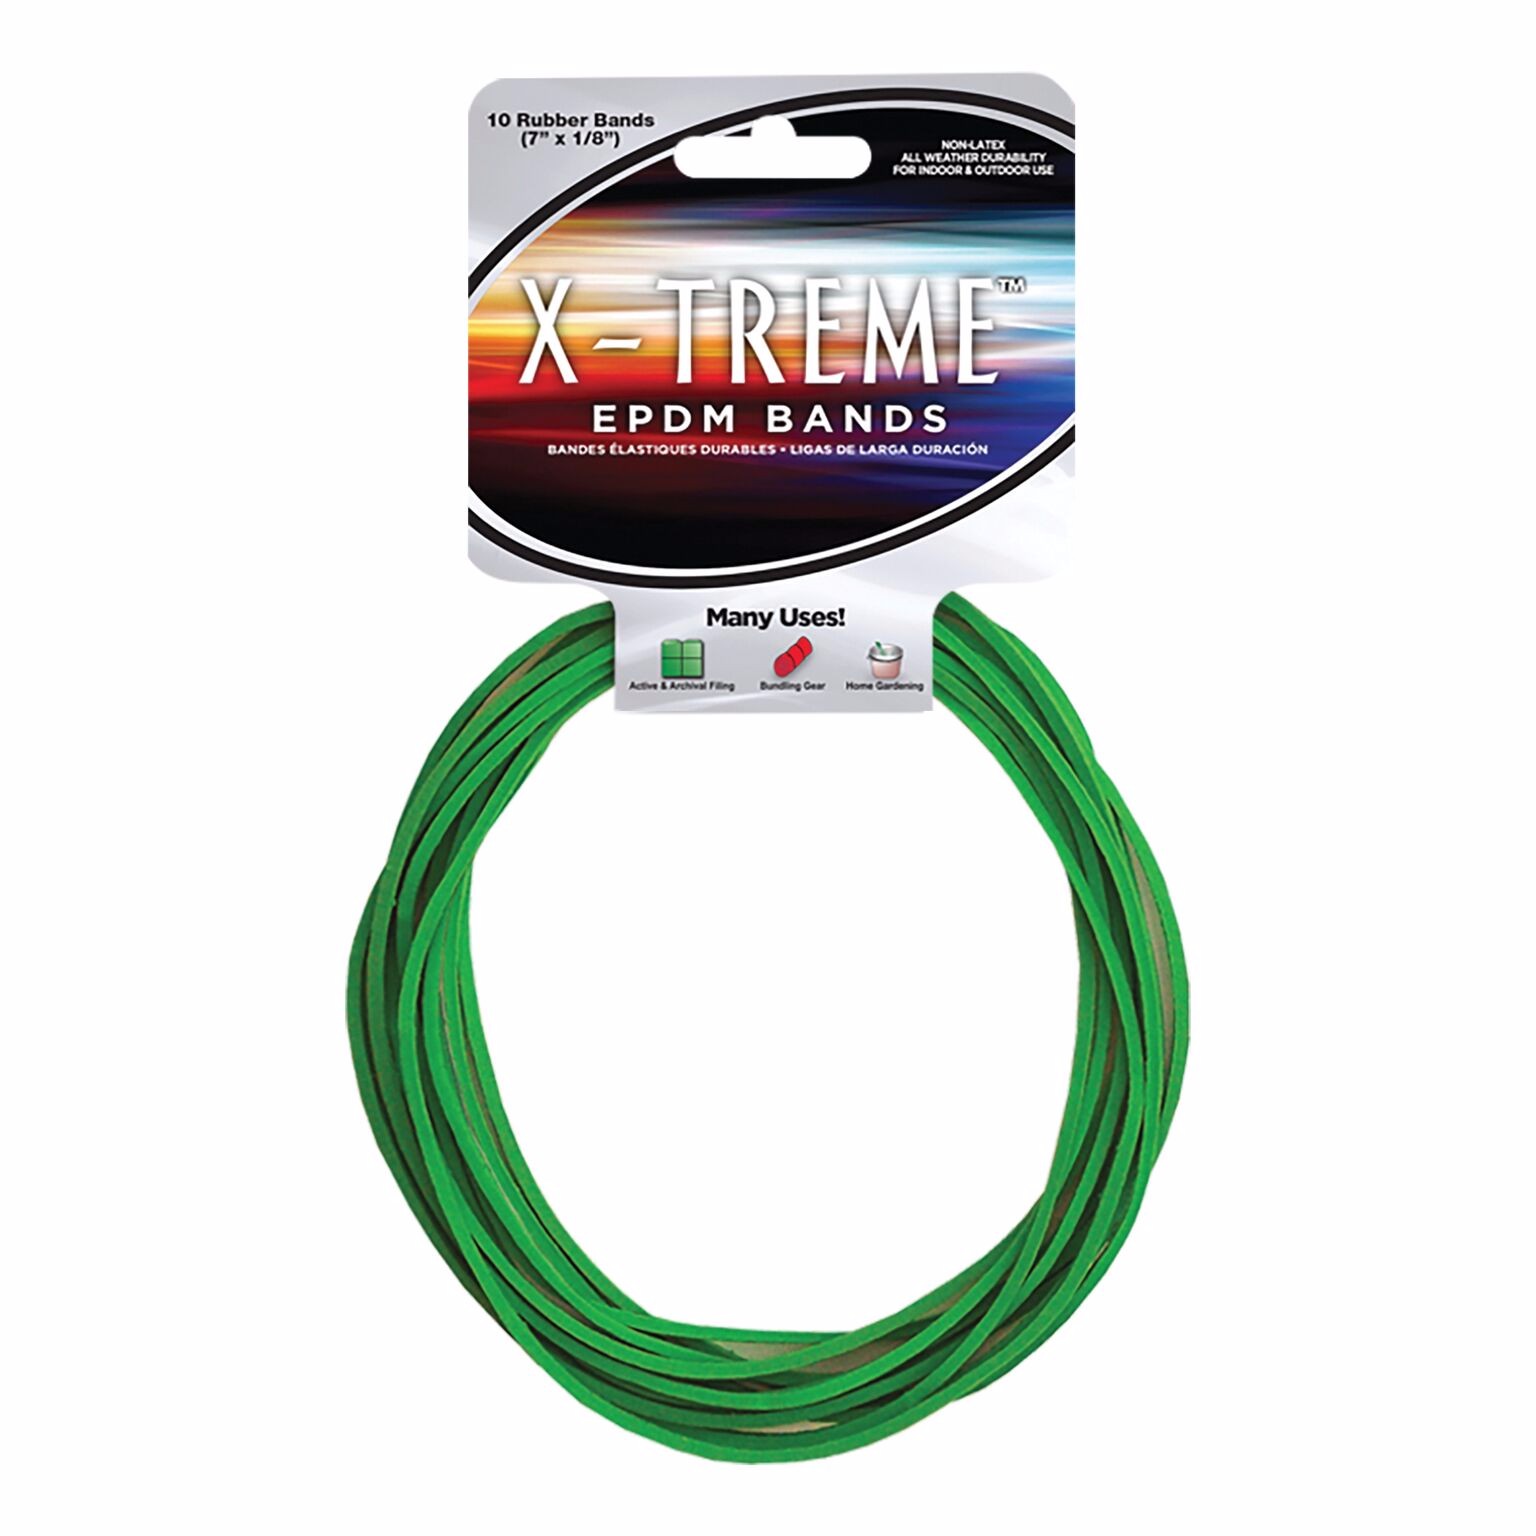 Alliance® X-treme File Bands 875 Bands D-10.11 IC Lime Green 7 x 1/8 5 PK 